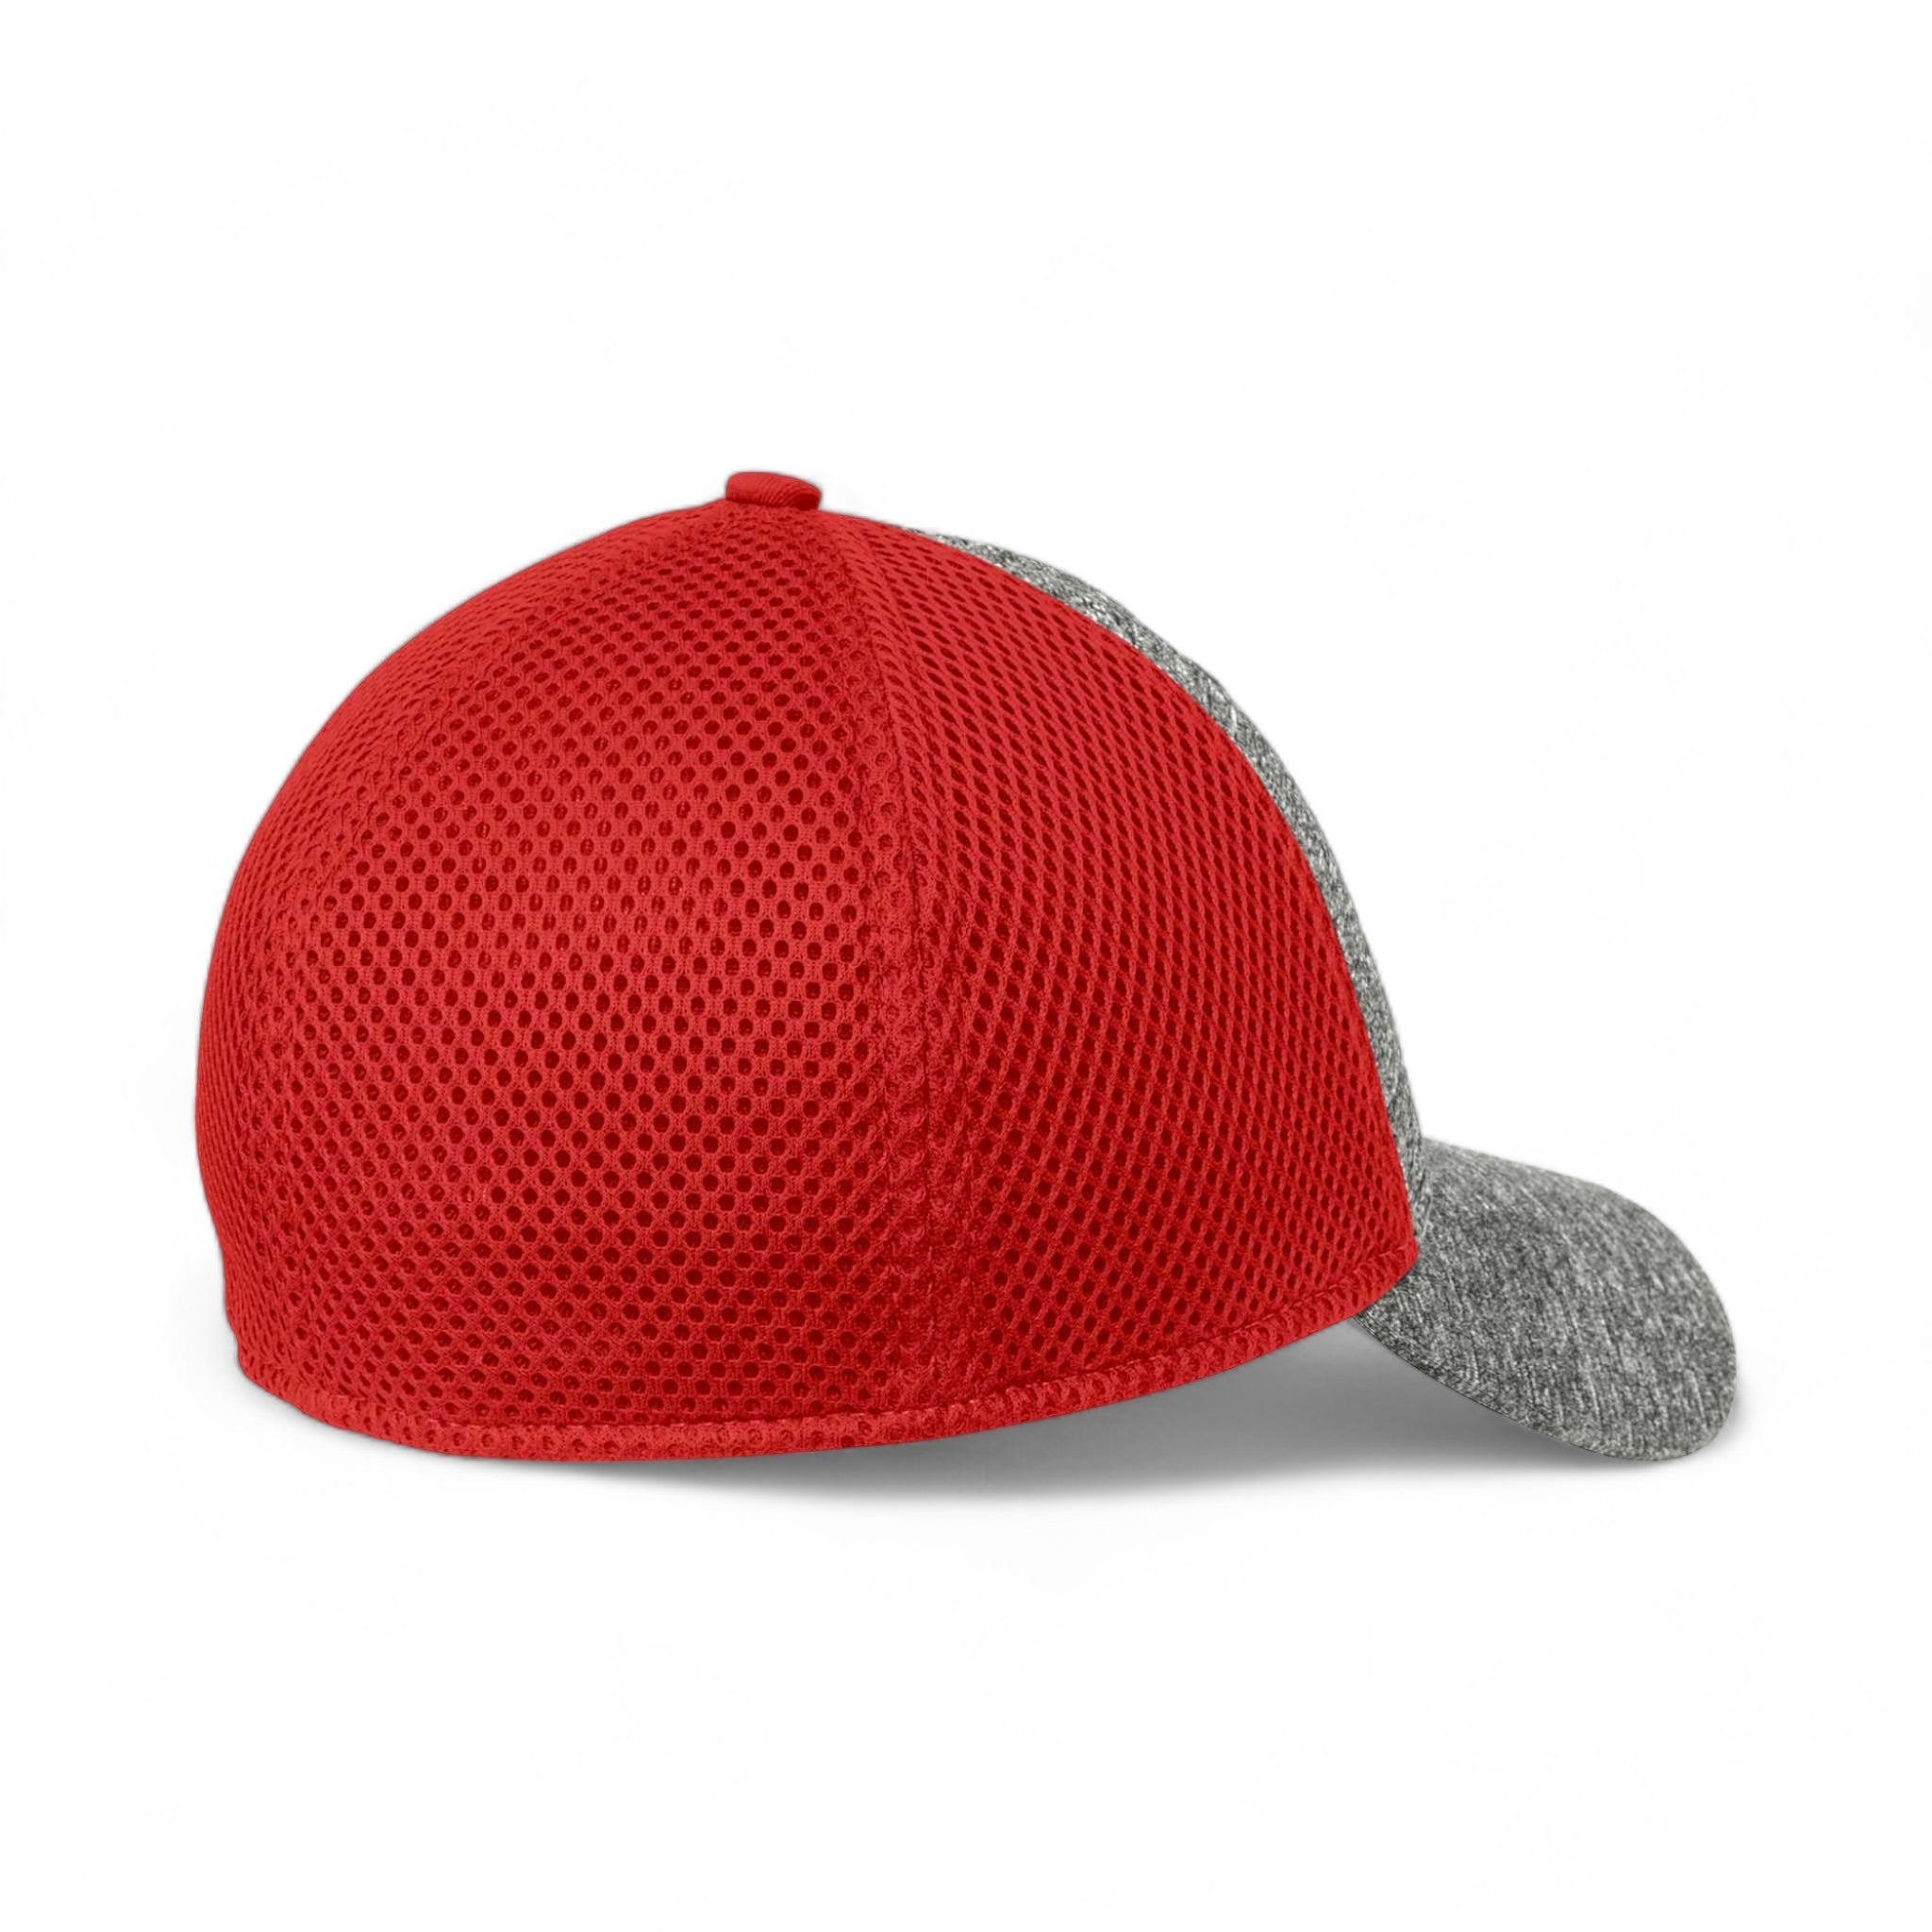 Back view of New Era NE702 custom hat in scarlet red and shadow heather